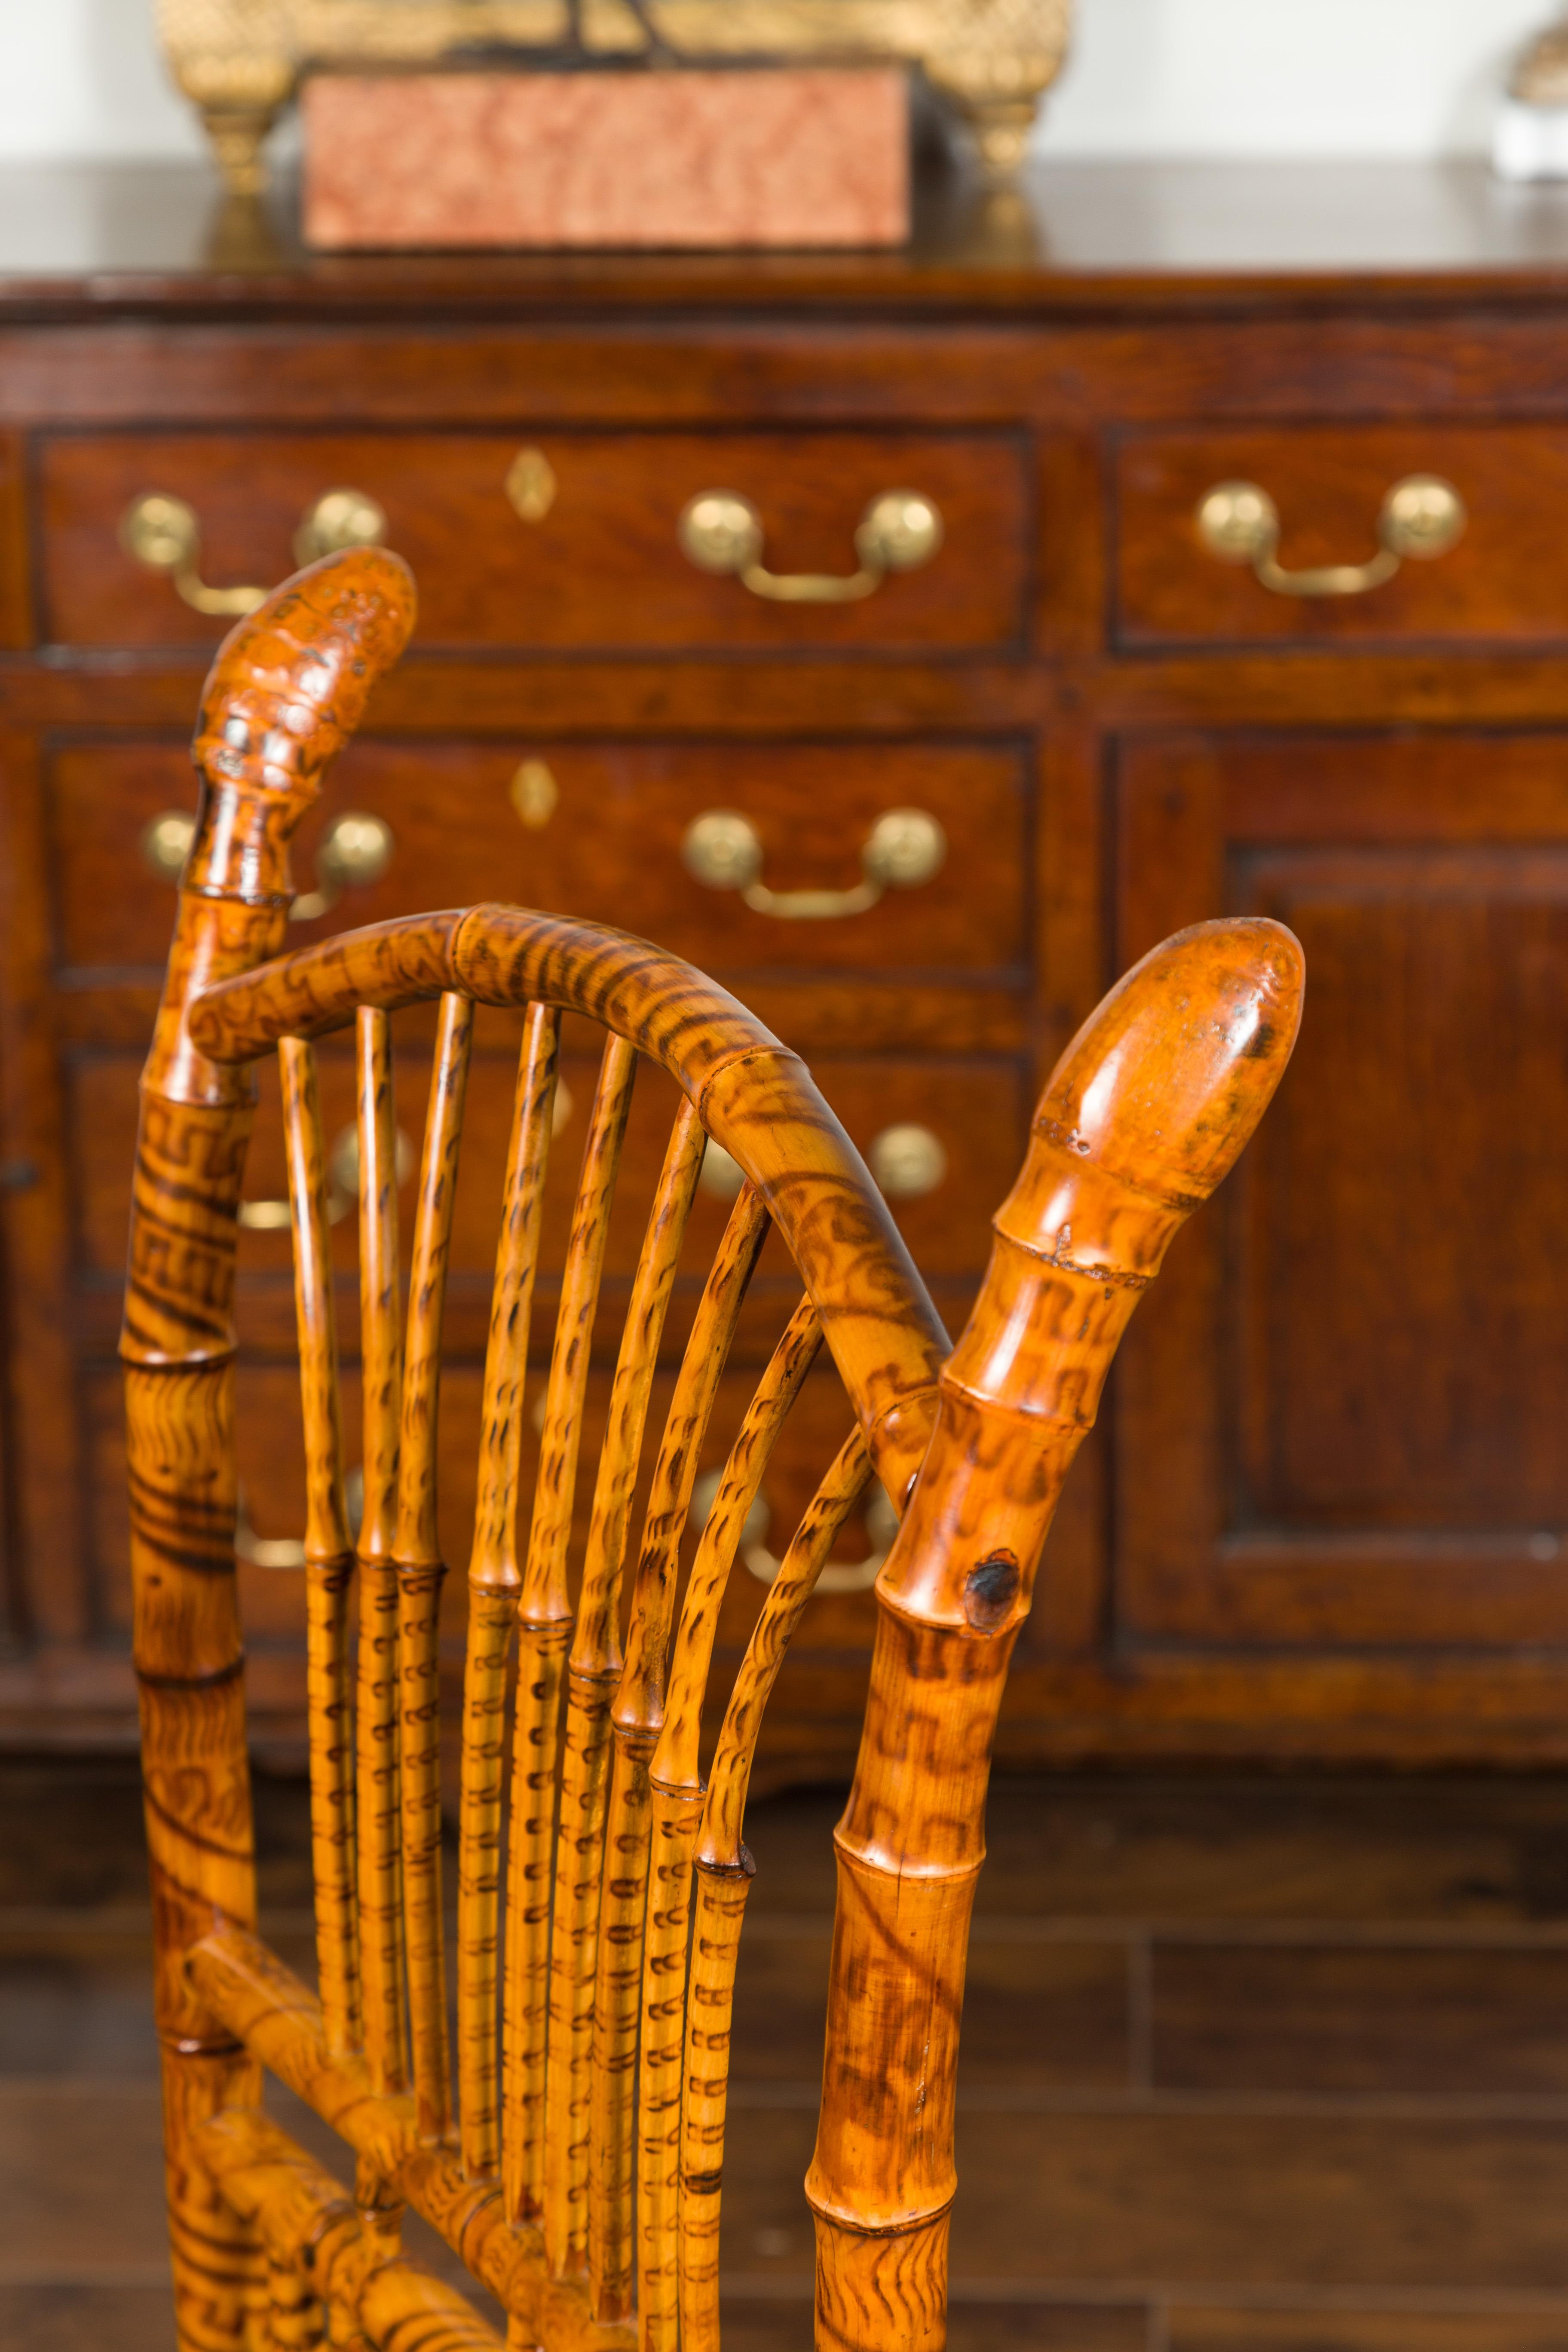 English 1890s Bamboo Slipper Chair with Fan Back, Rattan Seat and Casters For Sale 7